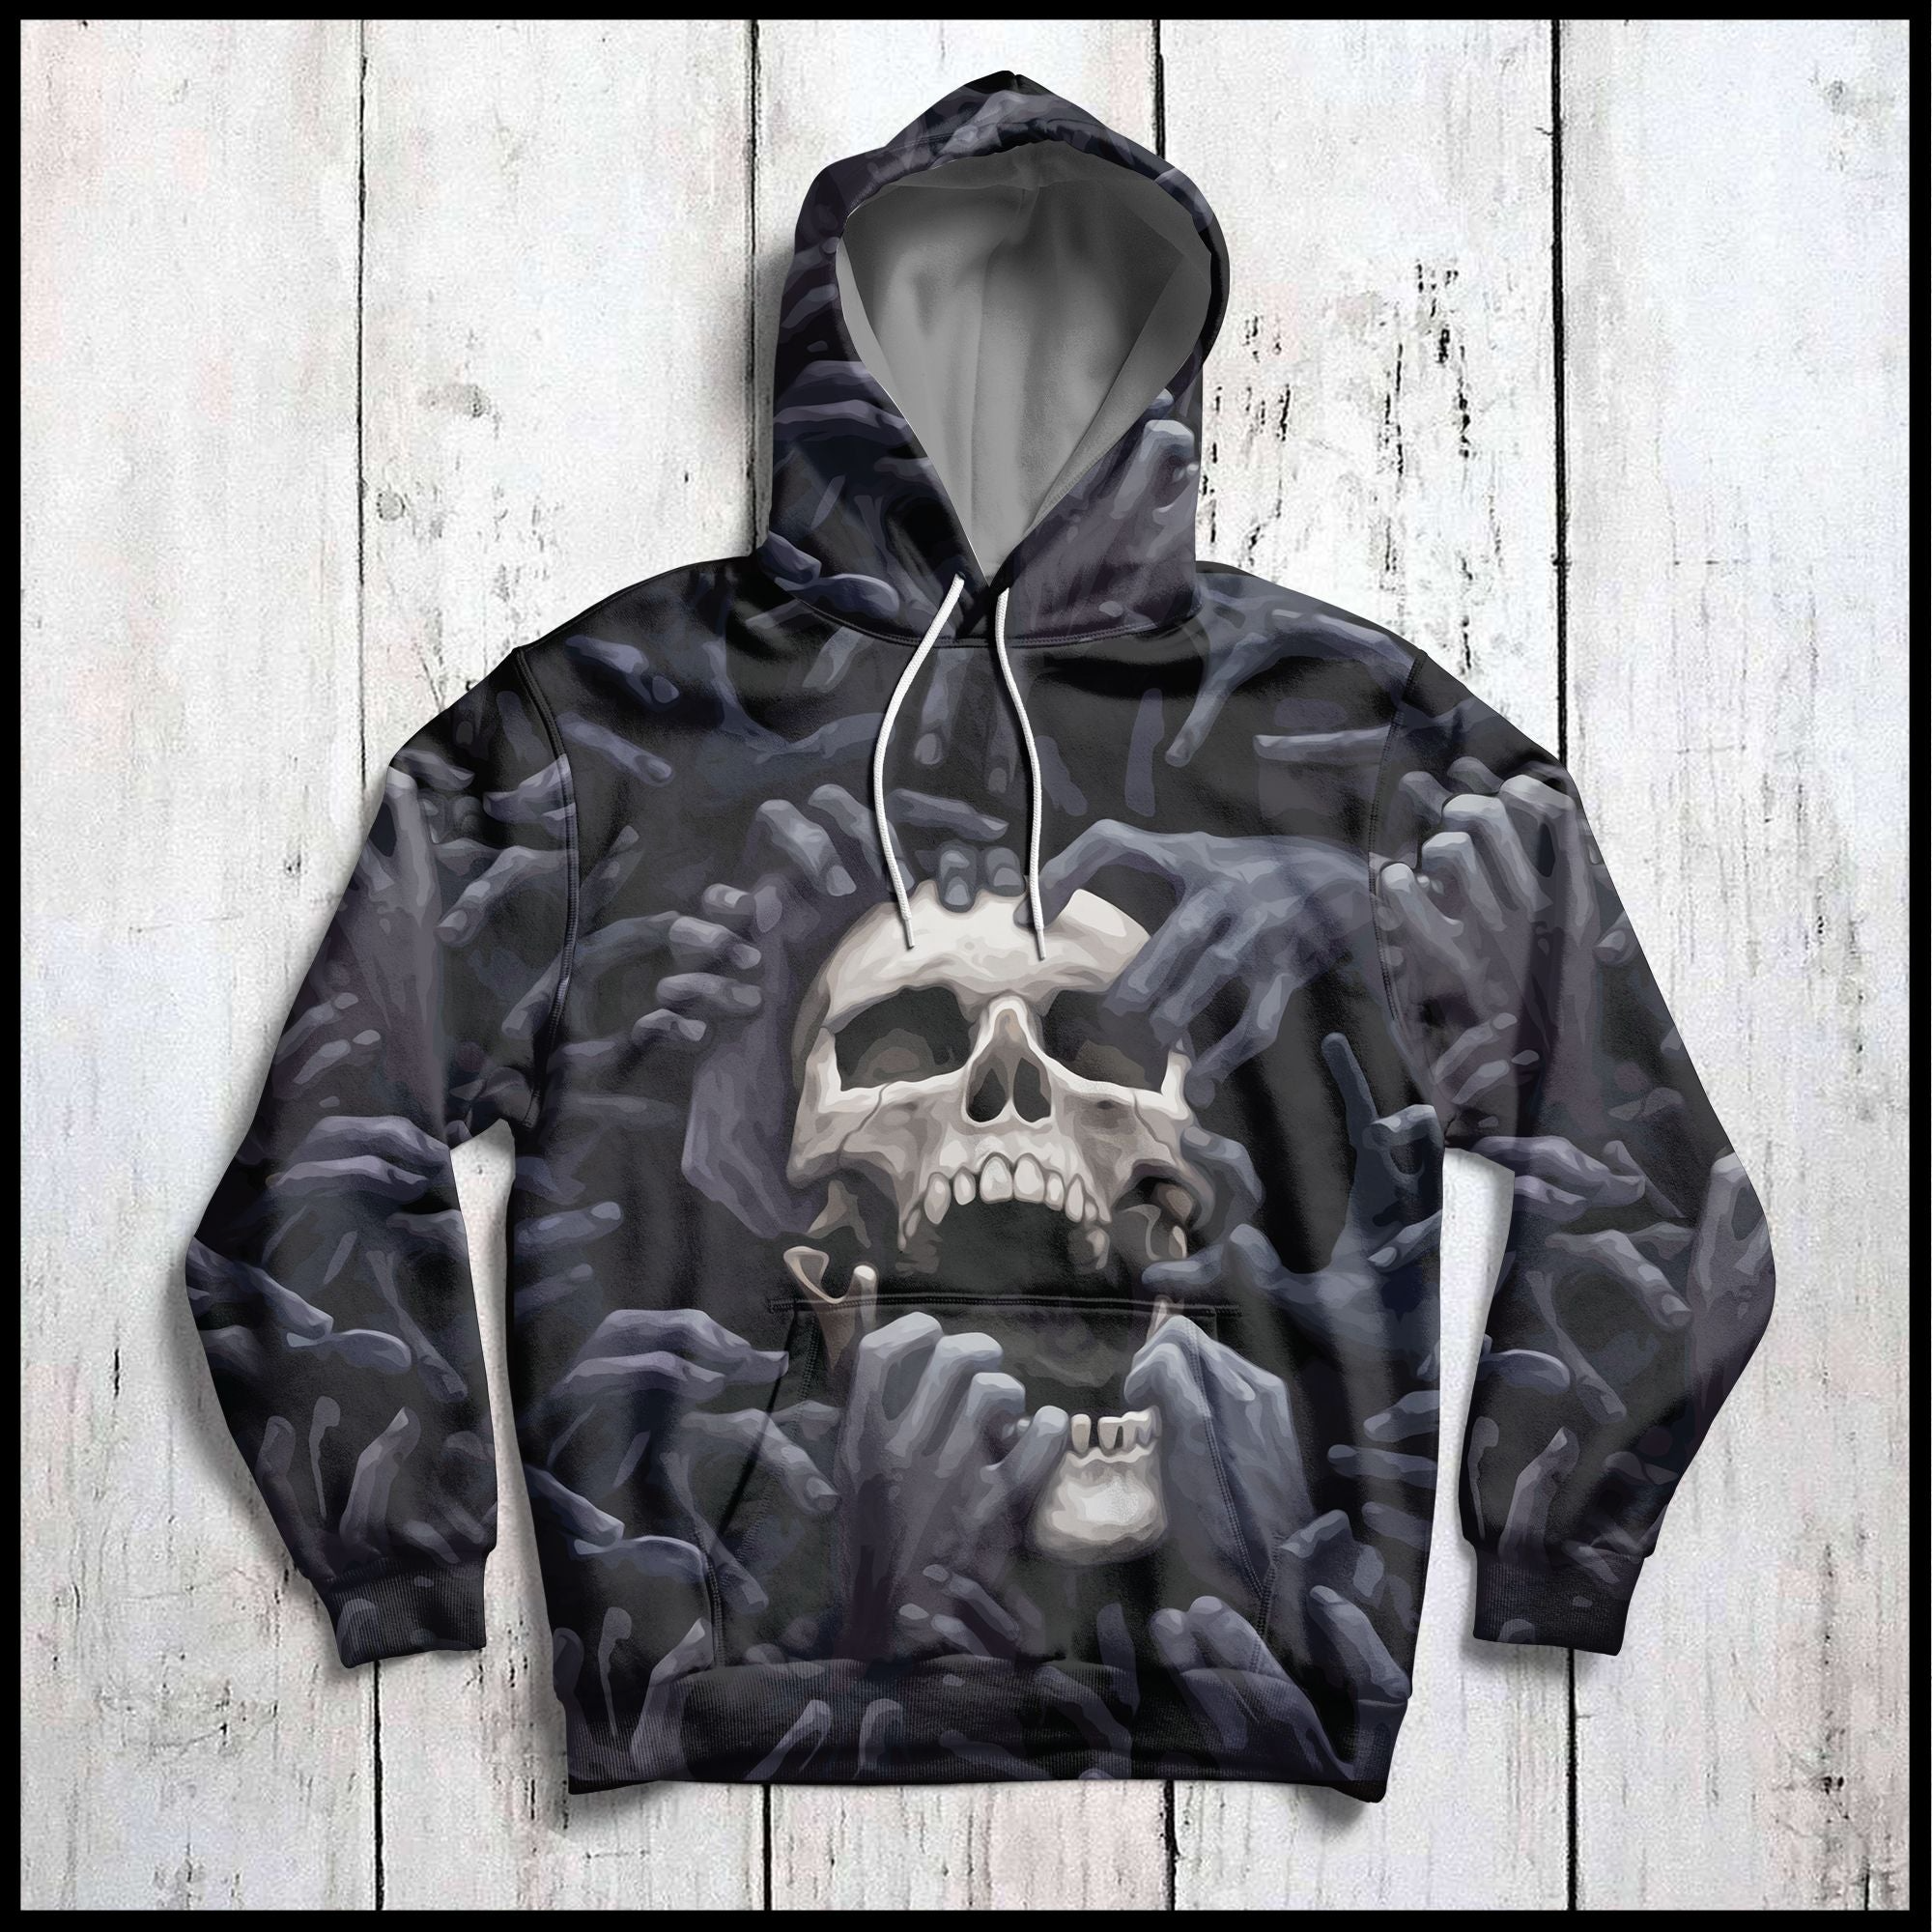 Skull Hands From The Hel Pullover Premium Hoodie, Perfect Outfit For Men And Women On Christmas New Year Autumn Winter